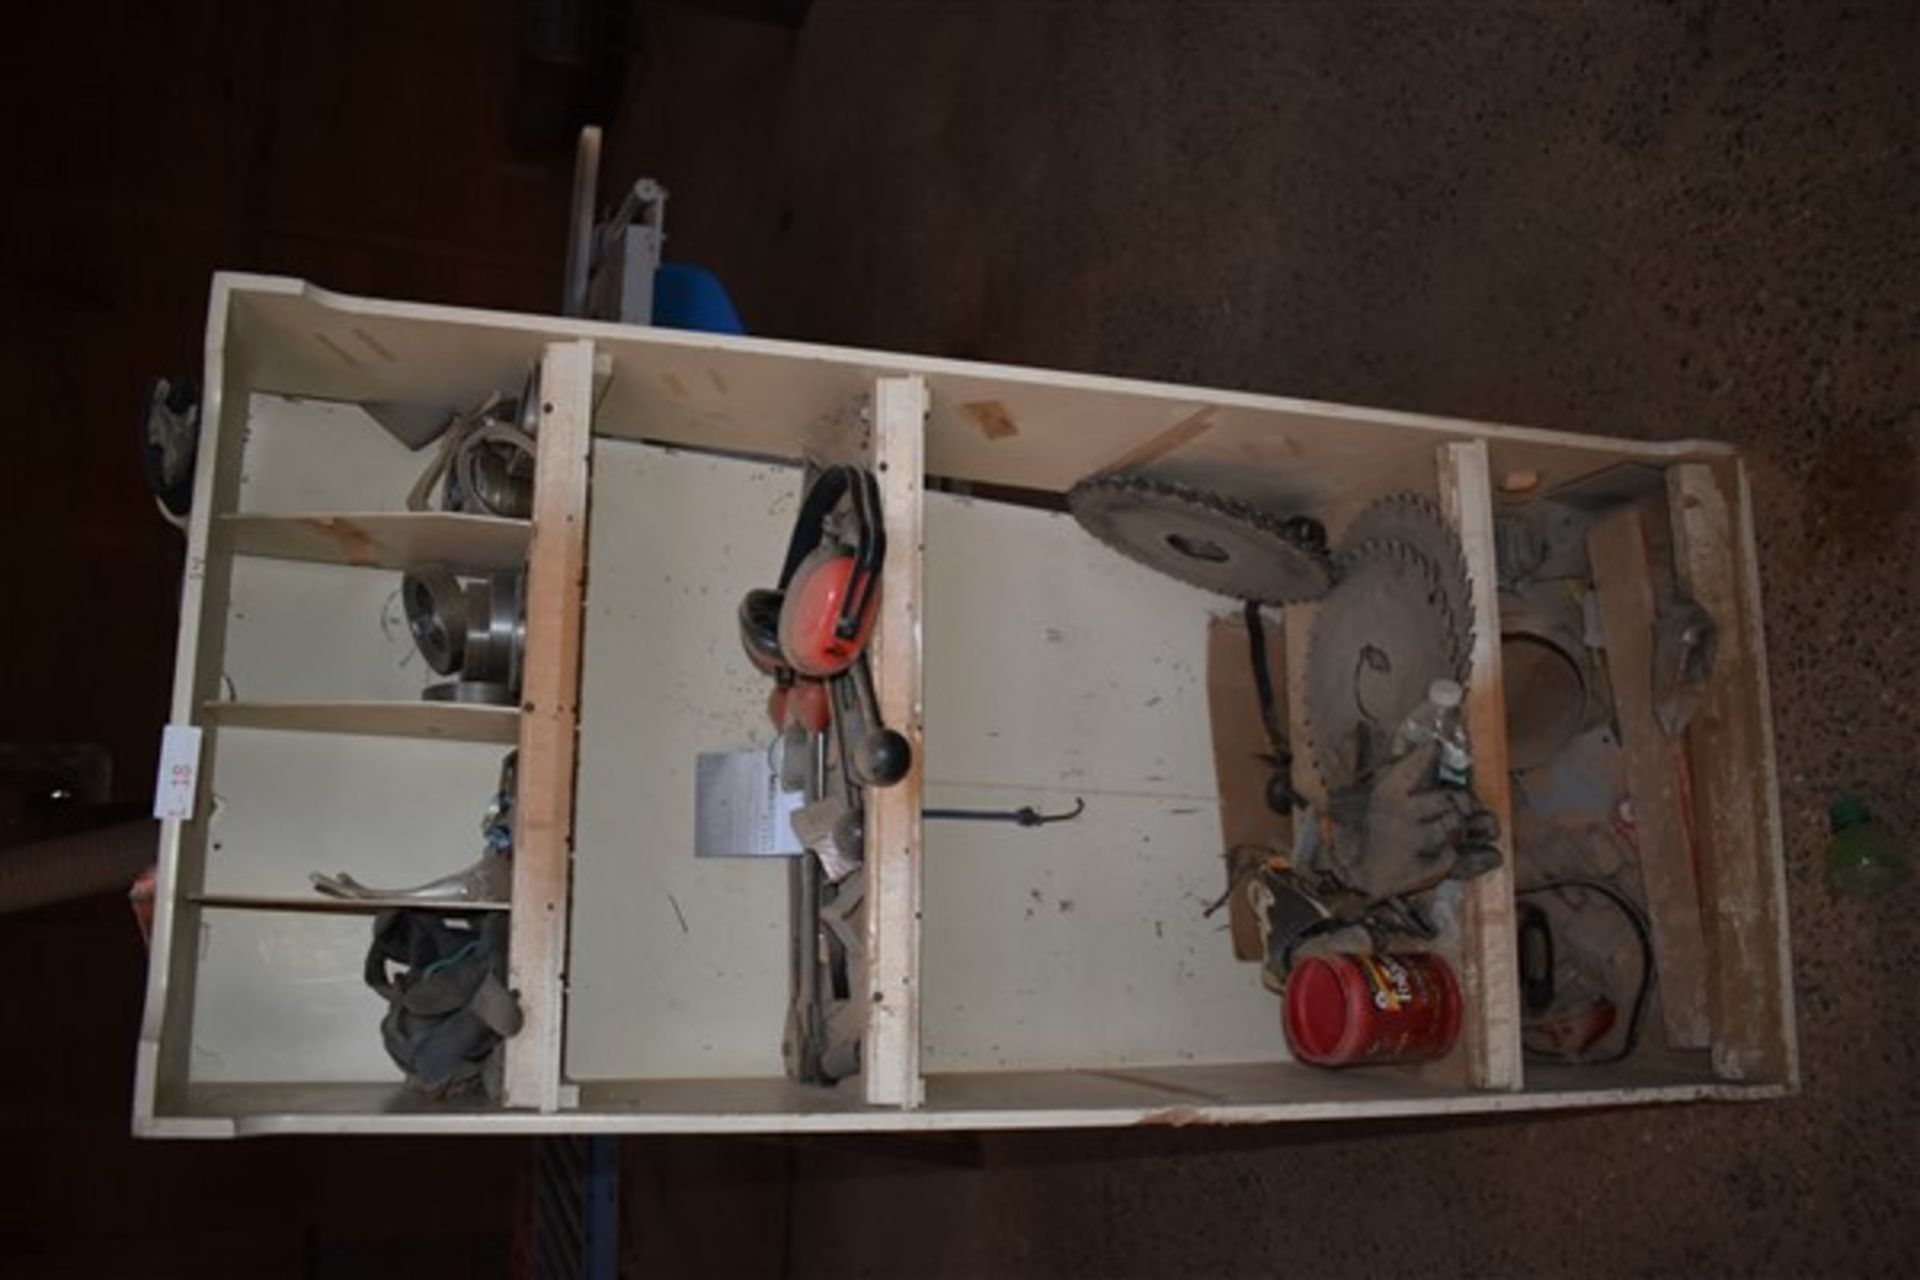 Shelving Unit containing Misc. Saw Parts